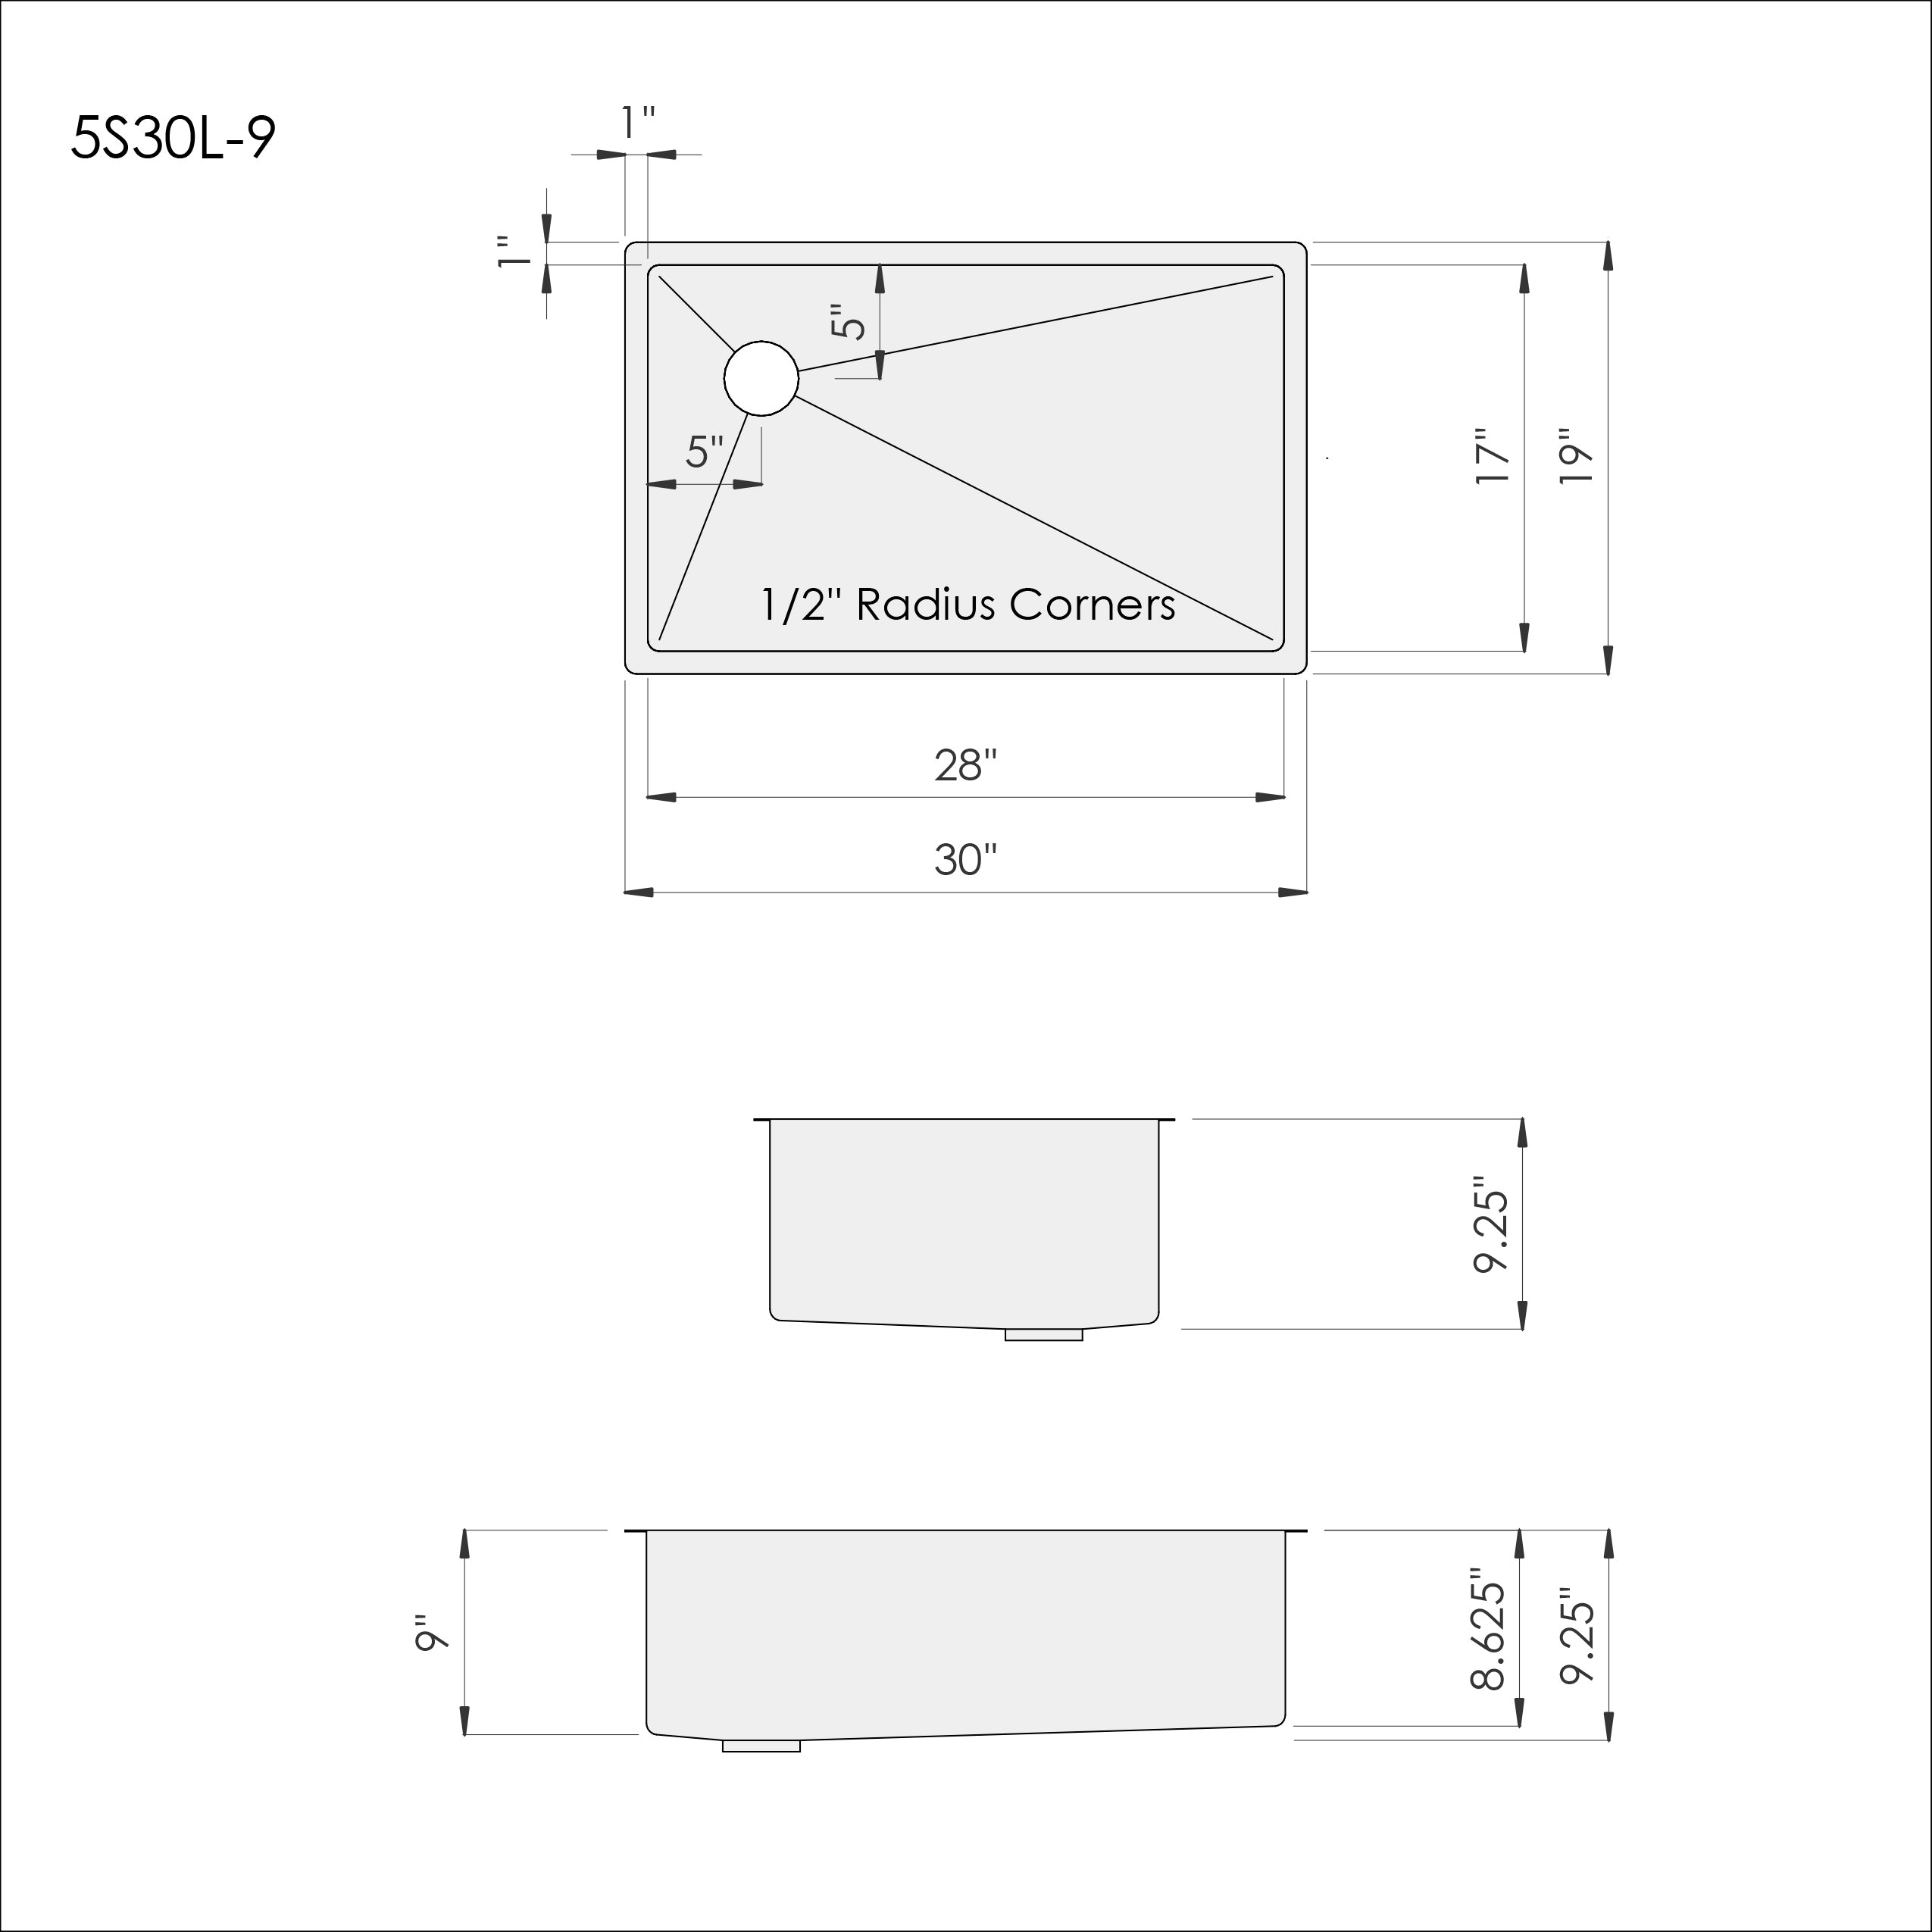 Dimensions of Create Good Sinks 30 inch stainless steel undermount kitchen sink with offset drain on the left. Patented seamless drain design and 9 inch depth